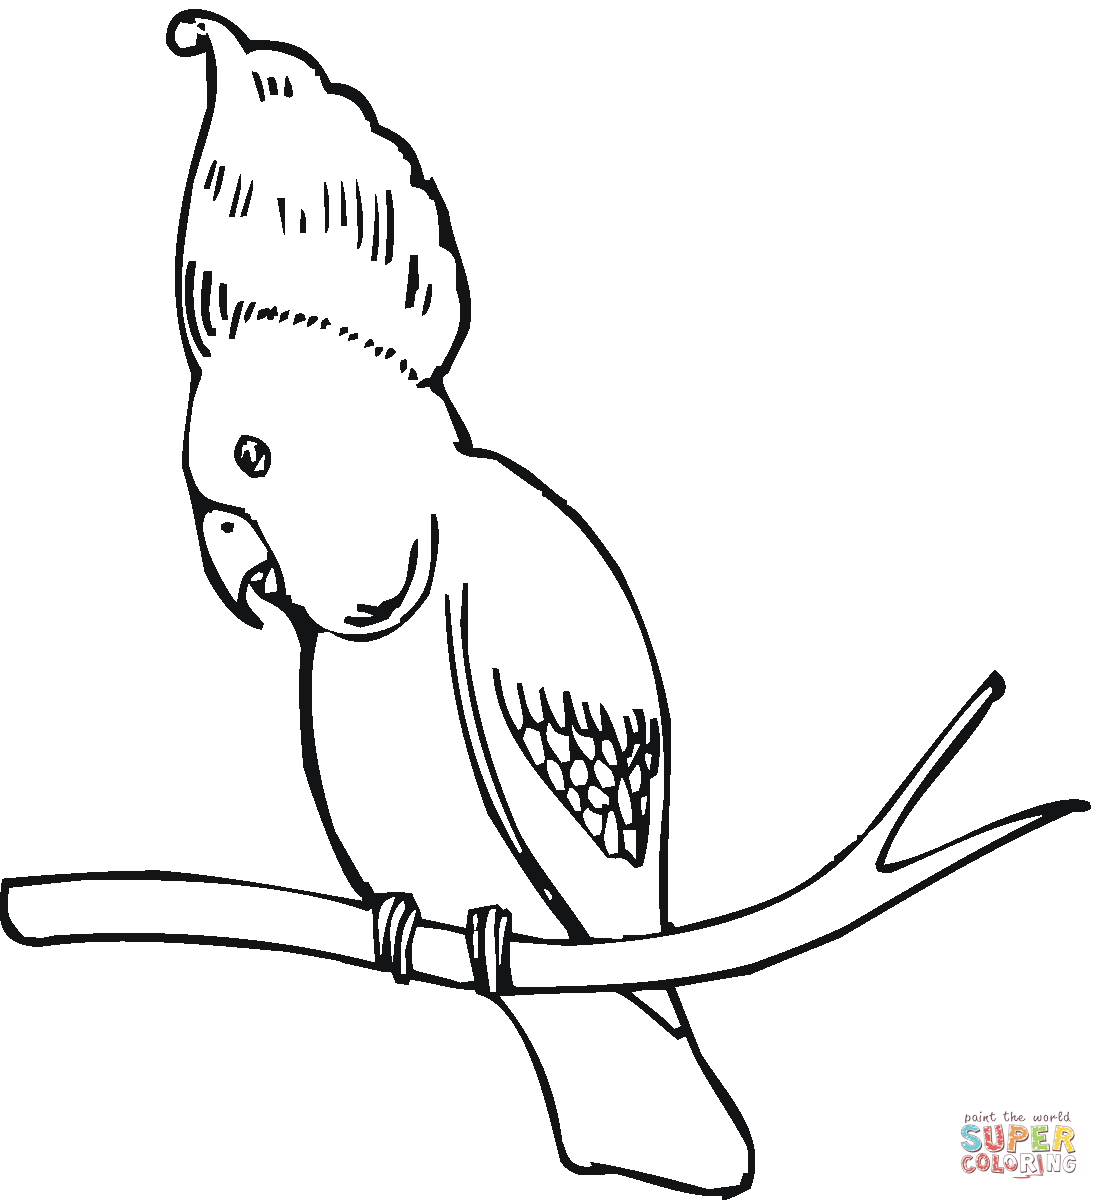 White Cockatoo coloring #8, Download drawings